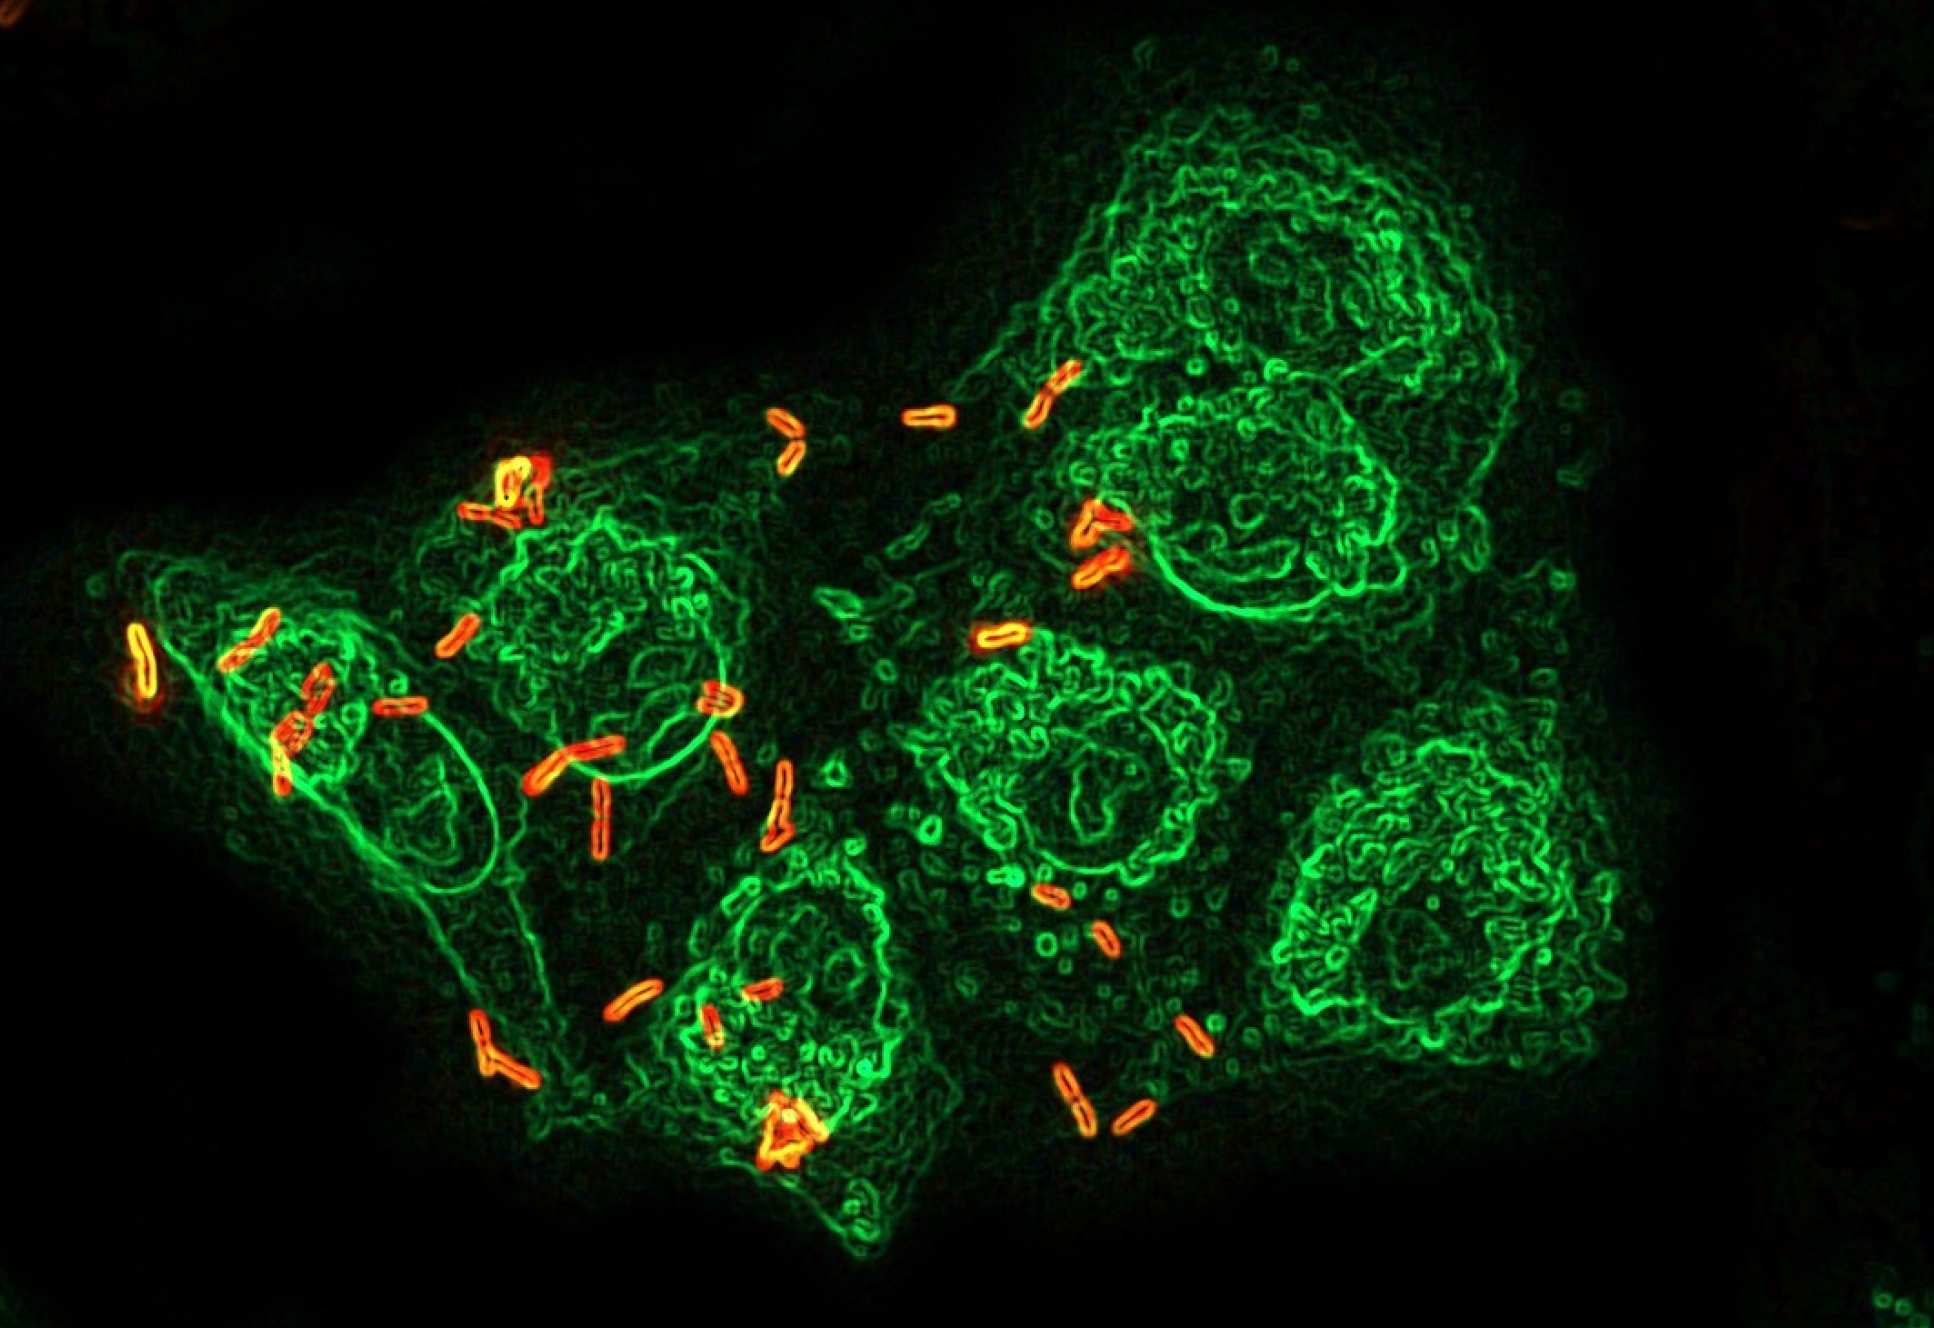  This image illustrates Pseudomonas colonization of the host lung tissue.